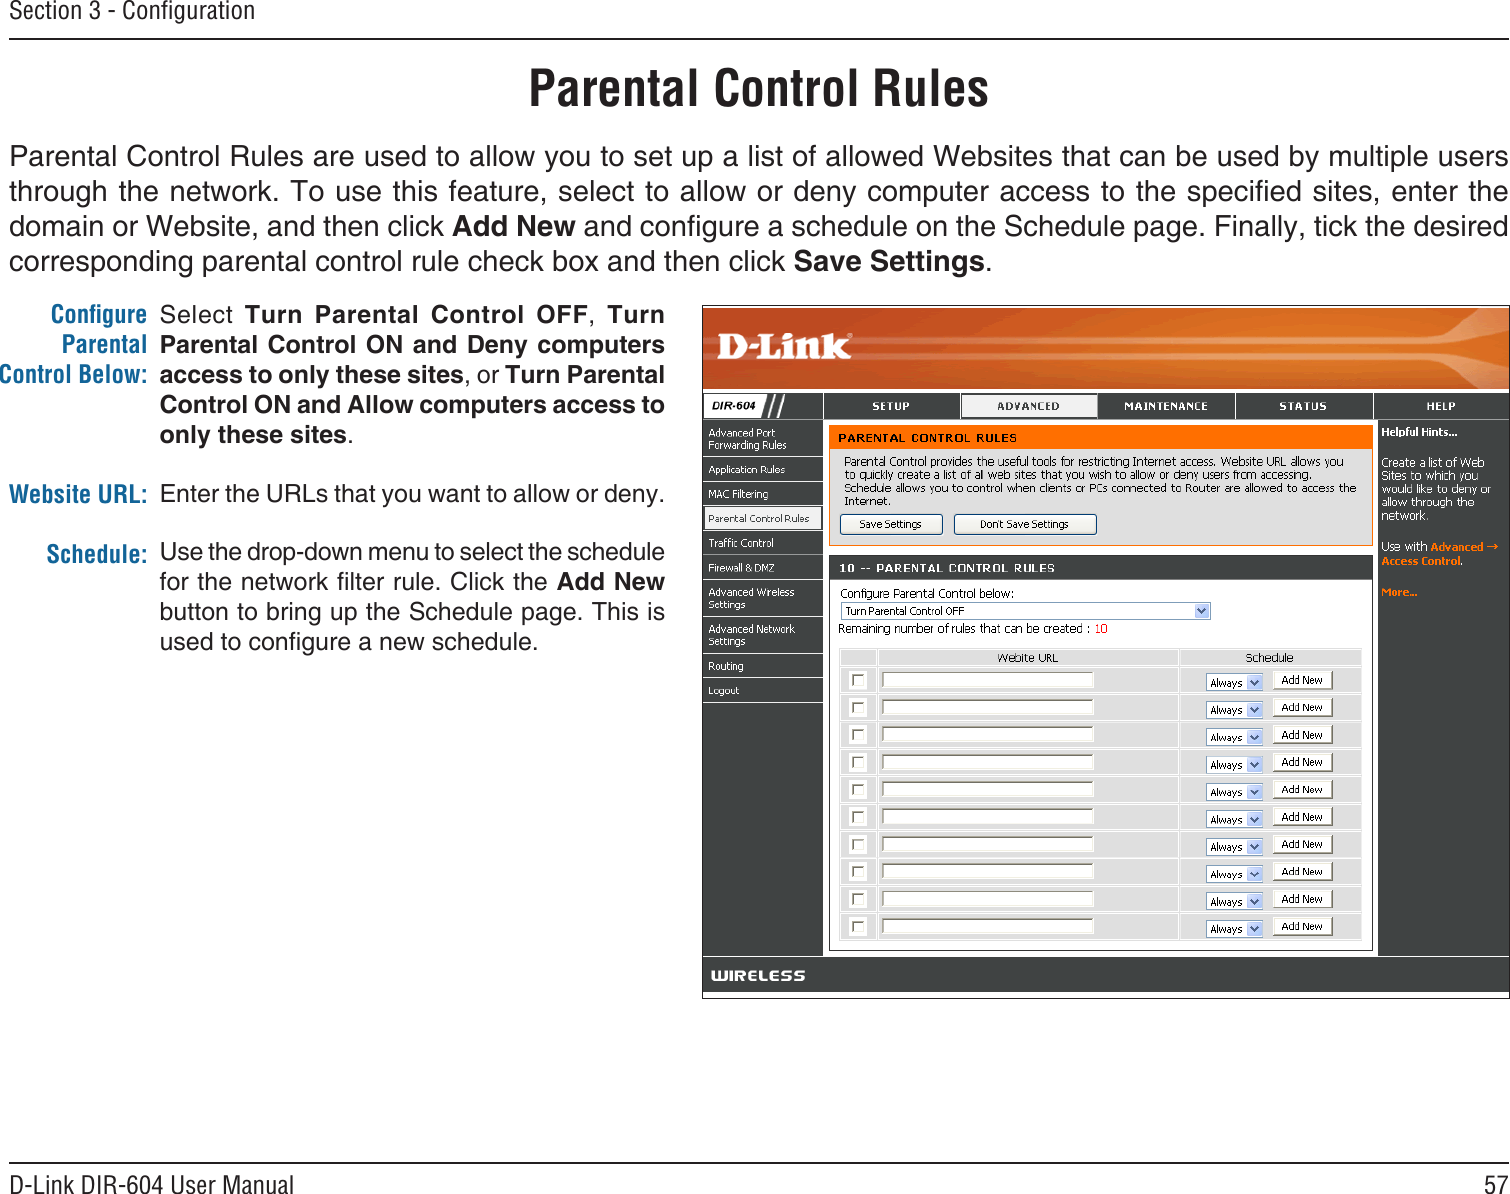 57D-Link DIR-604 User ManualSection 3 - ConﬁgurationSelect  Turn  Parental  Control  OFF,  Turn Parental Control  ON and Deny  computers access to only these sites, or Turn Parental Control ON and Allow computers access to only these sites.Enter the URLs that you want to allow or deny.Use the drop-down menu to select the schedule for the network lter rule. Click the Add New button to bring up the Schedule page. This is used to congure a new schedule.ConﬁgureParental Control Below:Website URL:Schedule:Parental Control RulesParental Control Rules are used to allow you to set up a list of allowed Websites that can be used by multiple users through the network. To use this feature, select to allow or deny computer access to the specied sites, enter the domain or Website, and then click Add New and congure a schedule on the Schedule page. Finally, tick the desired corresponding parental control rule check box and then click Save Settings. 